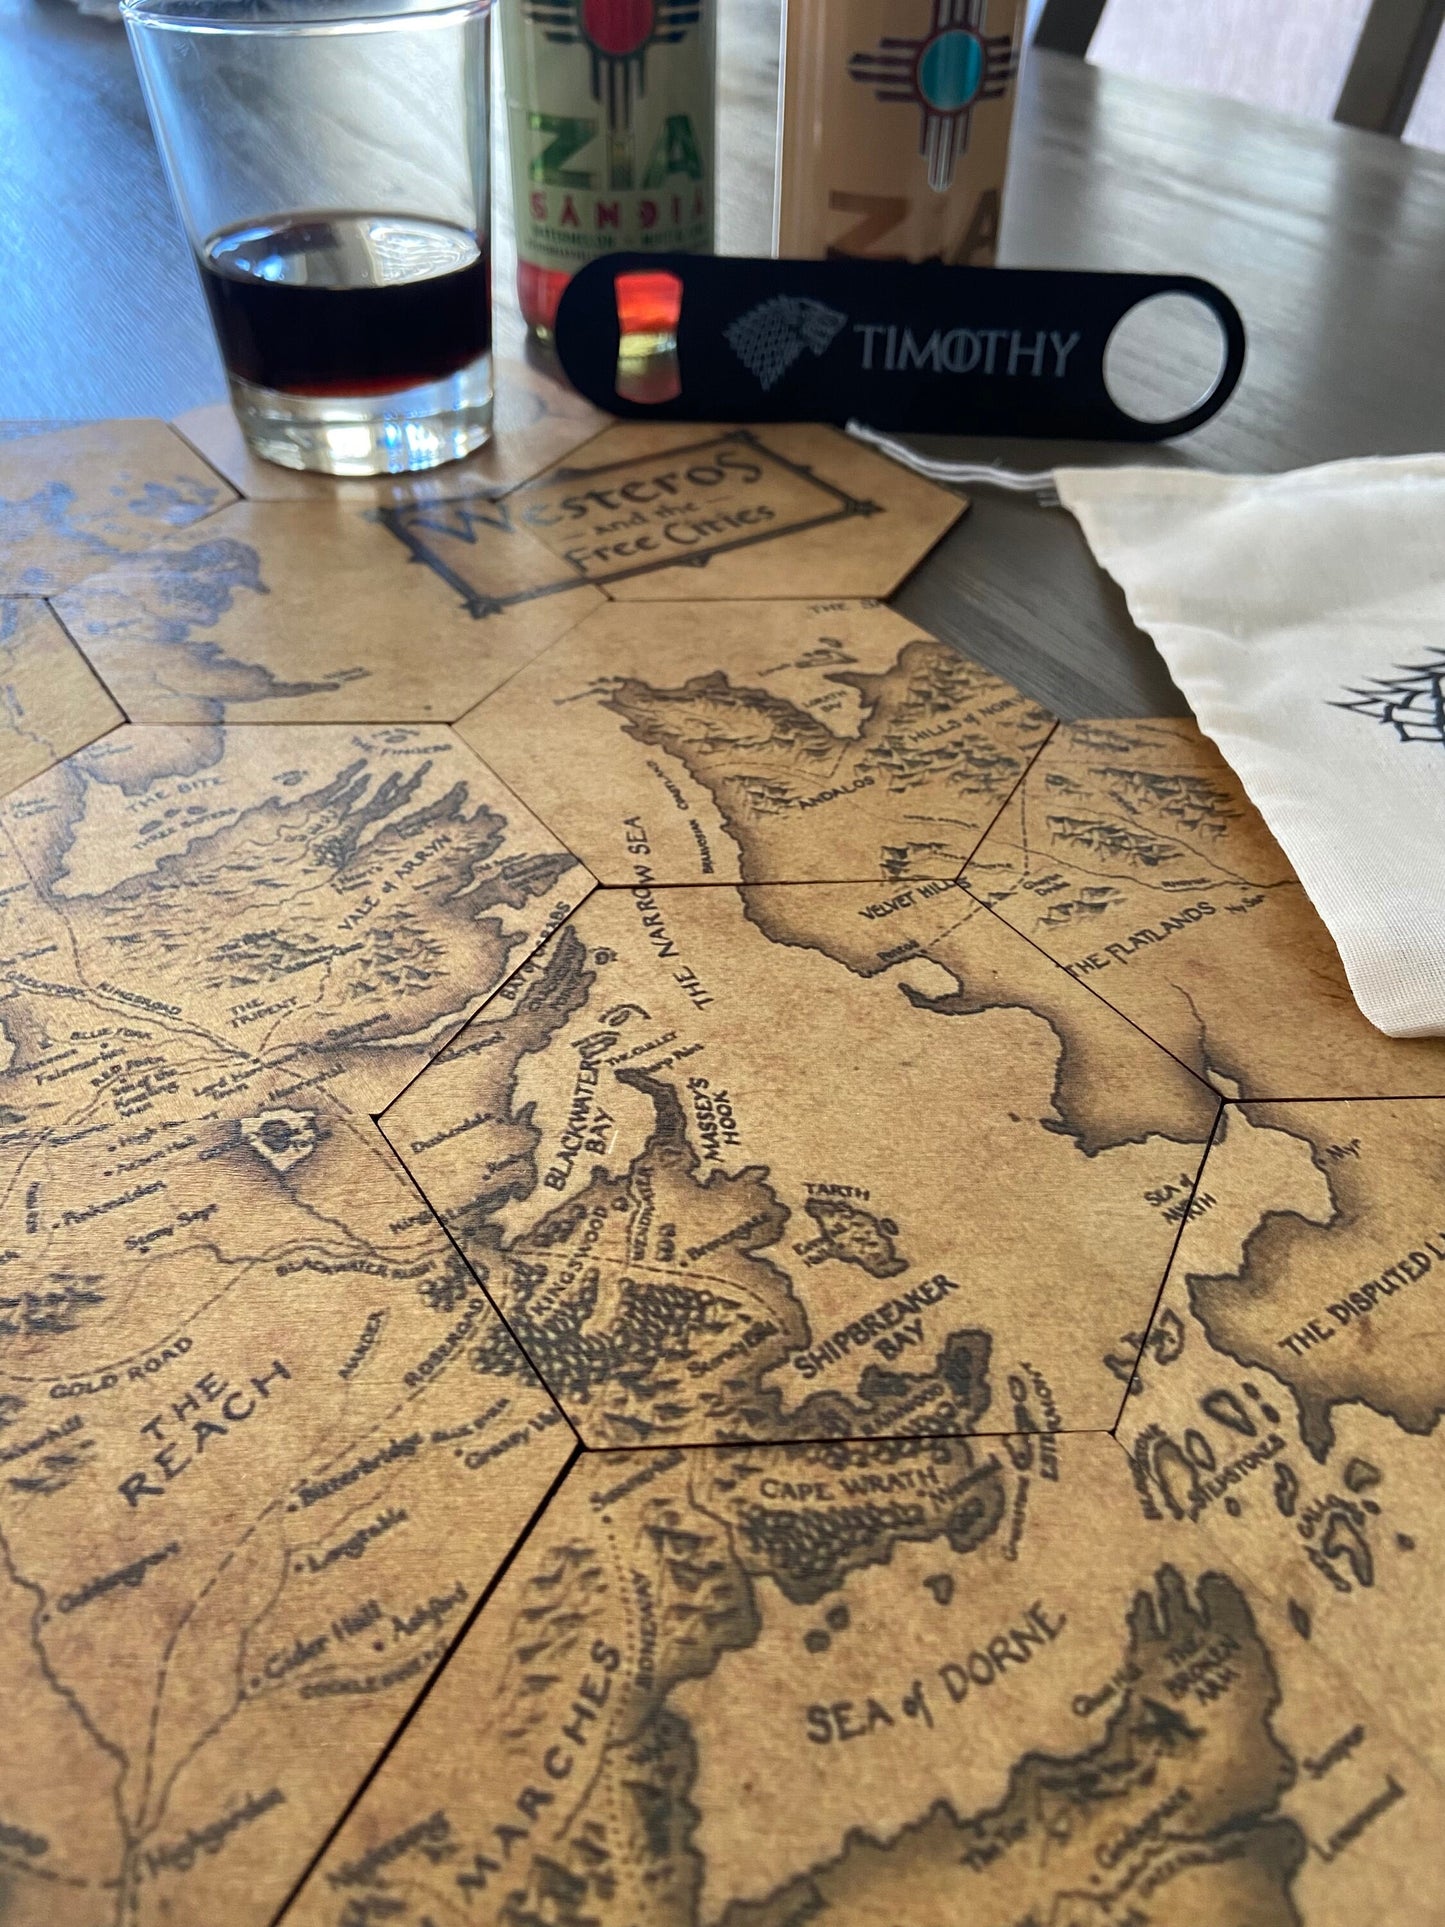 GOT Inspired Coaster Map Set with Black Stainless Steel Bottle Opener and Drawstring Bag